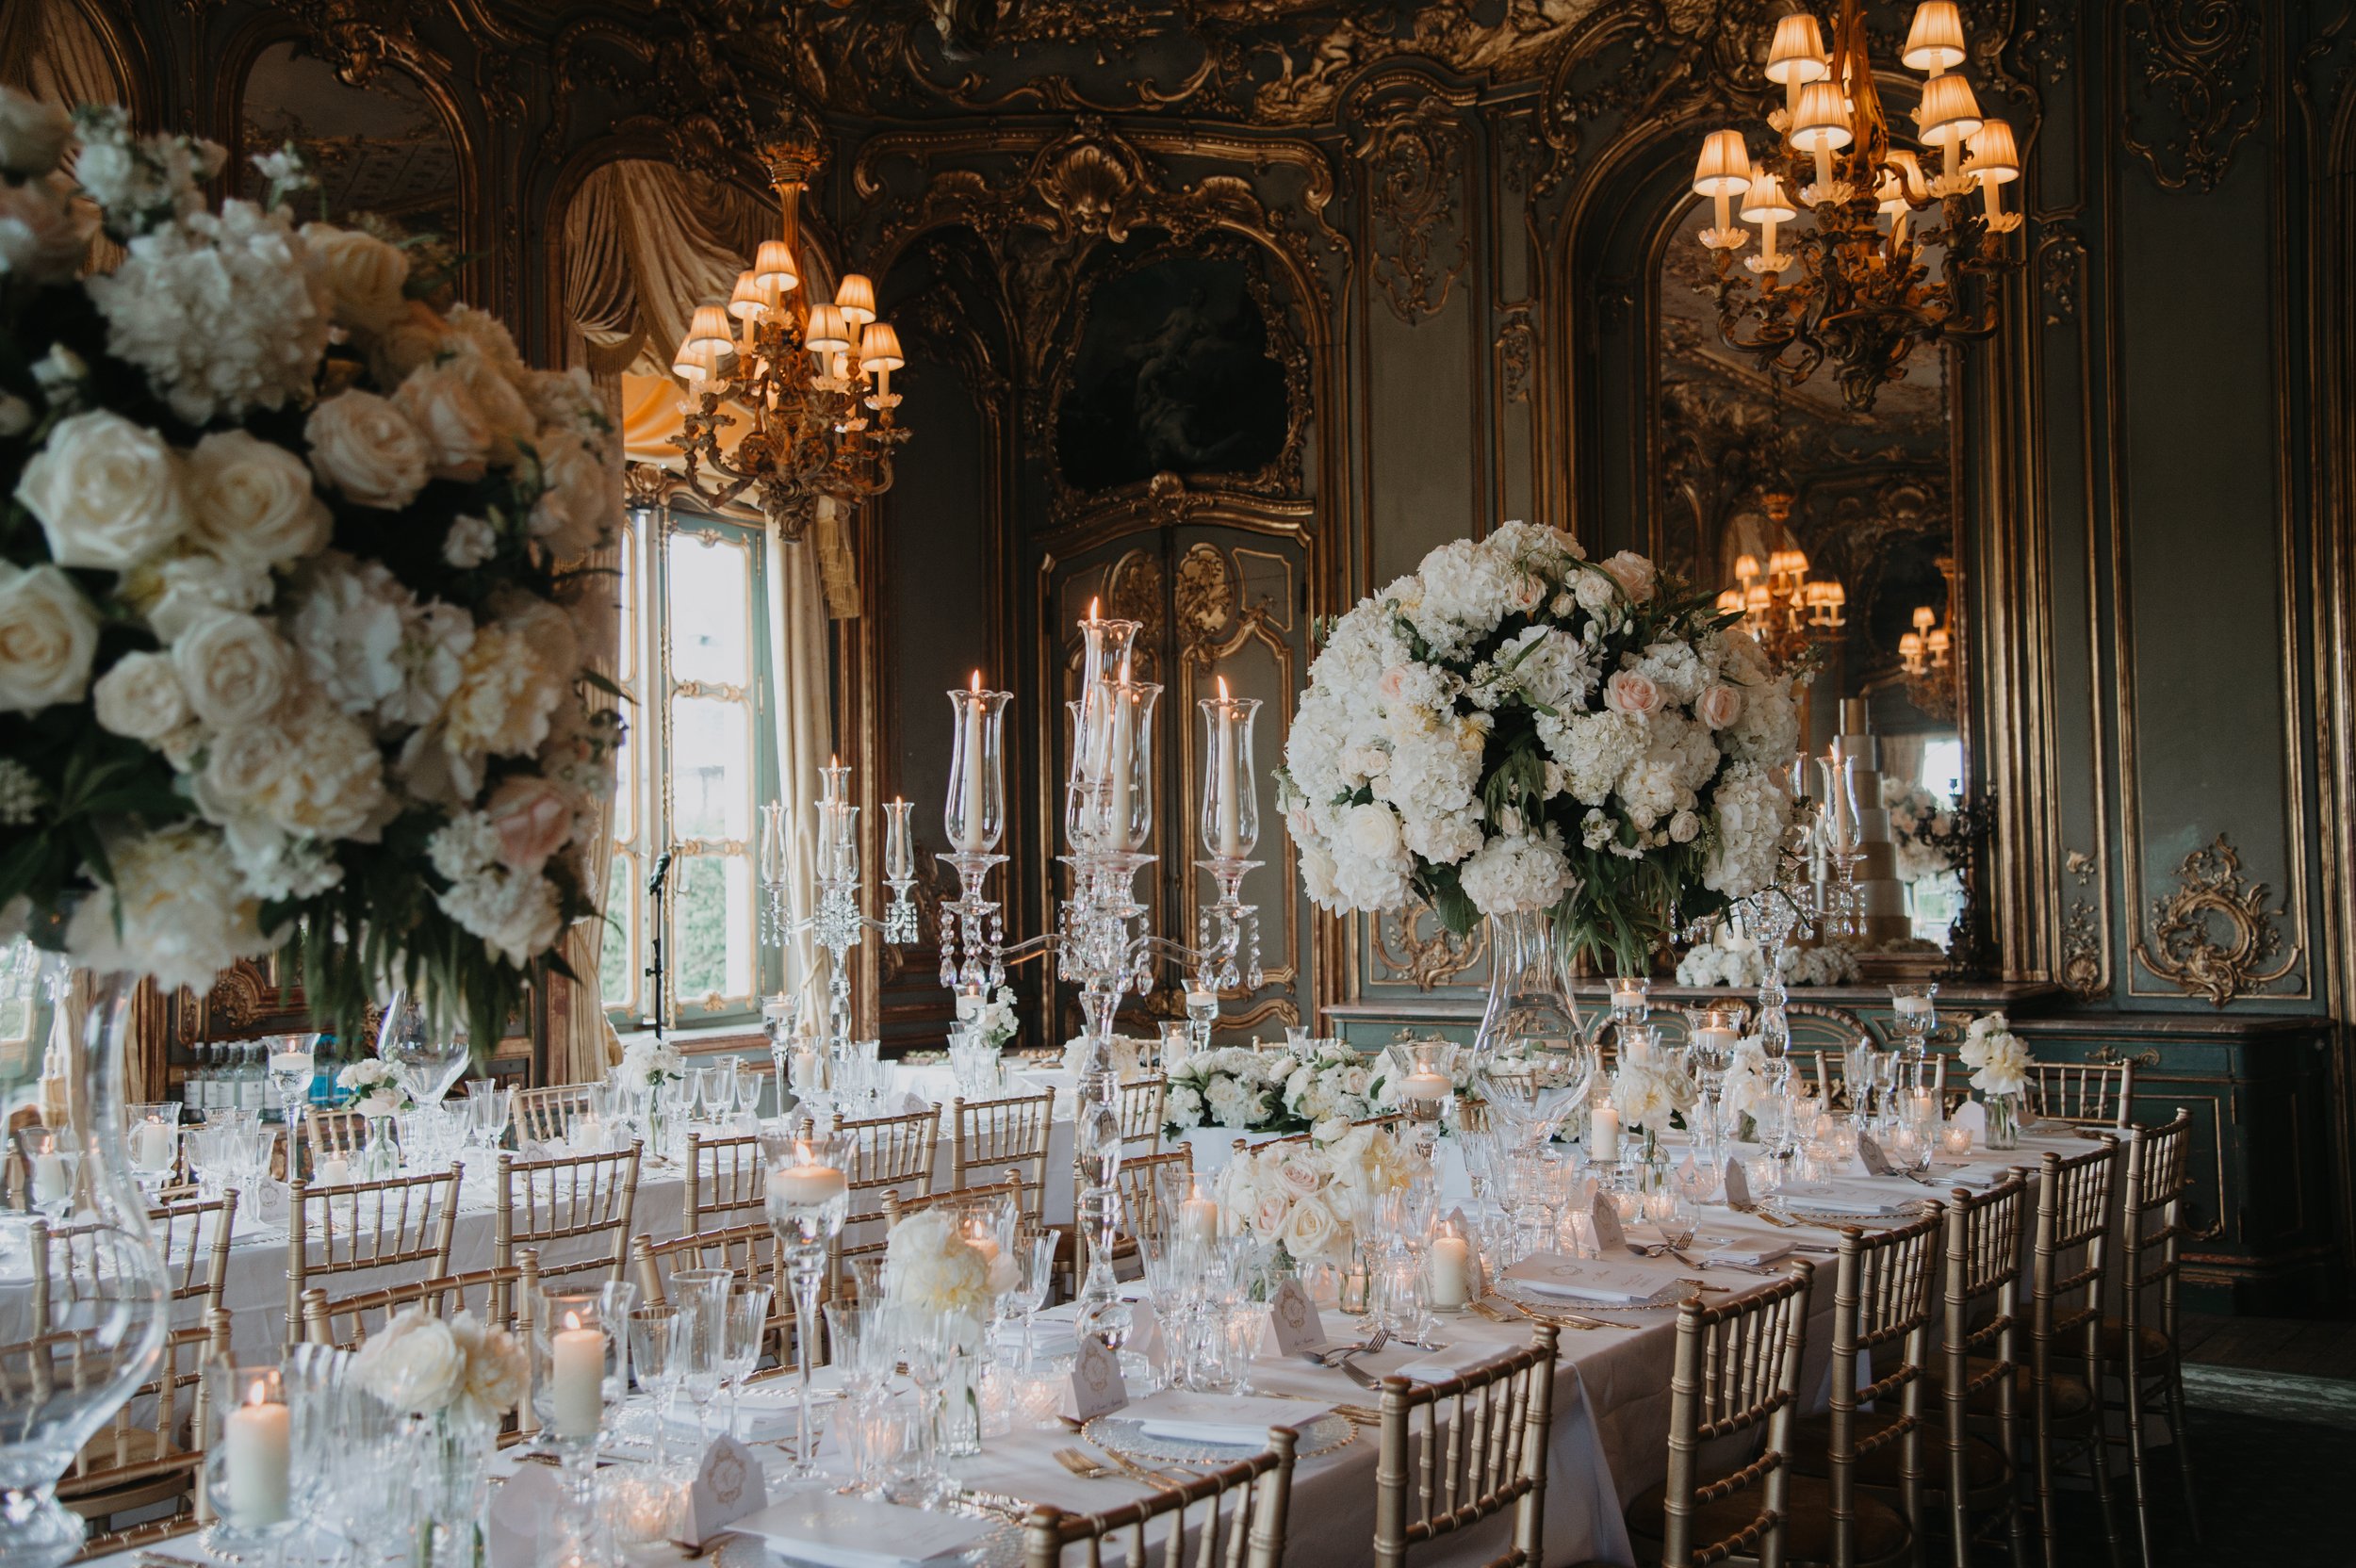 French Dining Room cliveden house wedding.jpg